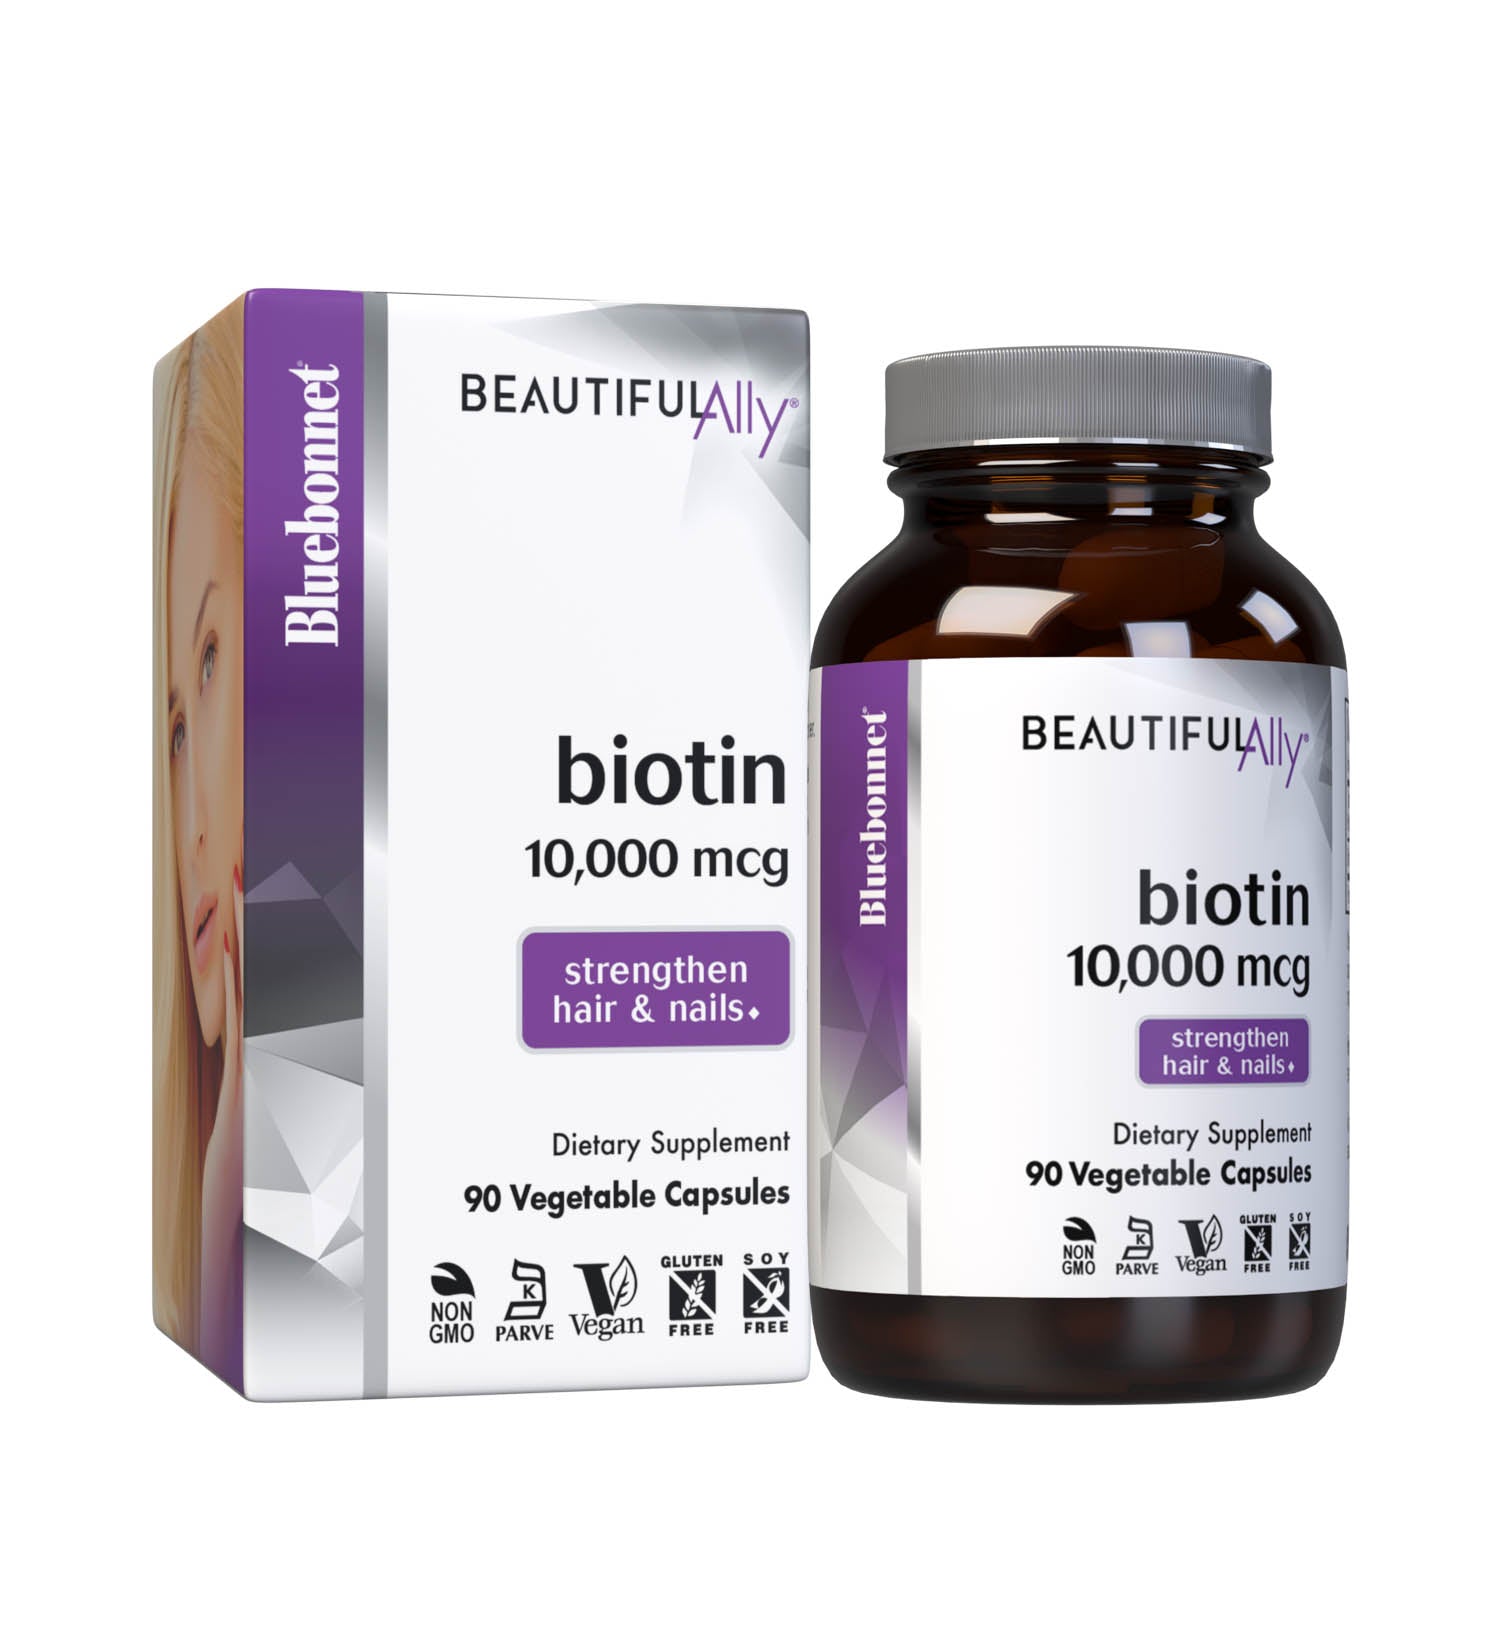 Bluebonnet’s Beautiful Ally Biotin 10,000 mcg 90 Vegetable Capsules are specially formulated to help strengthen hair and nails with yeast-free biotin, a water-soluble B vitamin, in its crystalline form. With box. #size_90 count